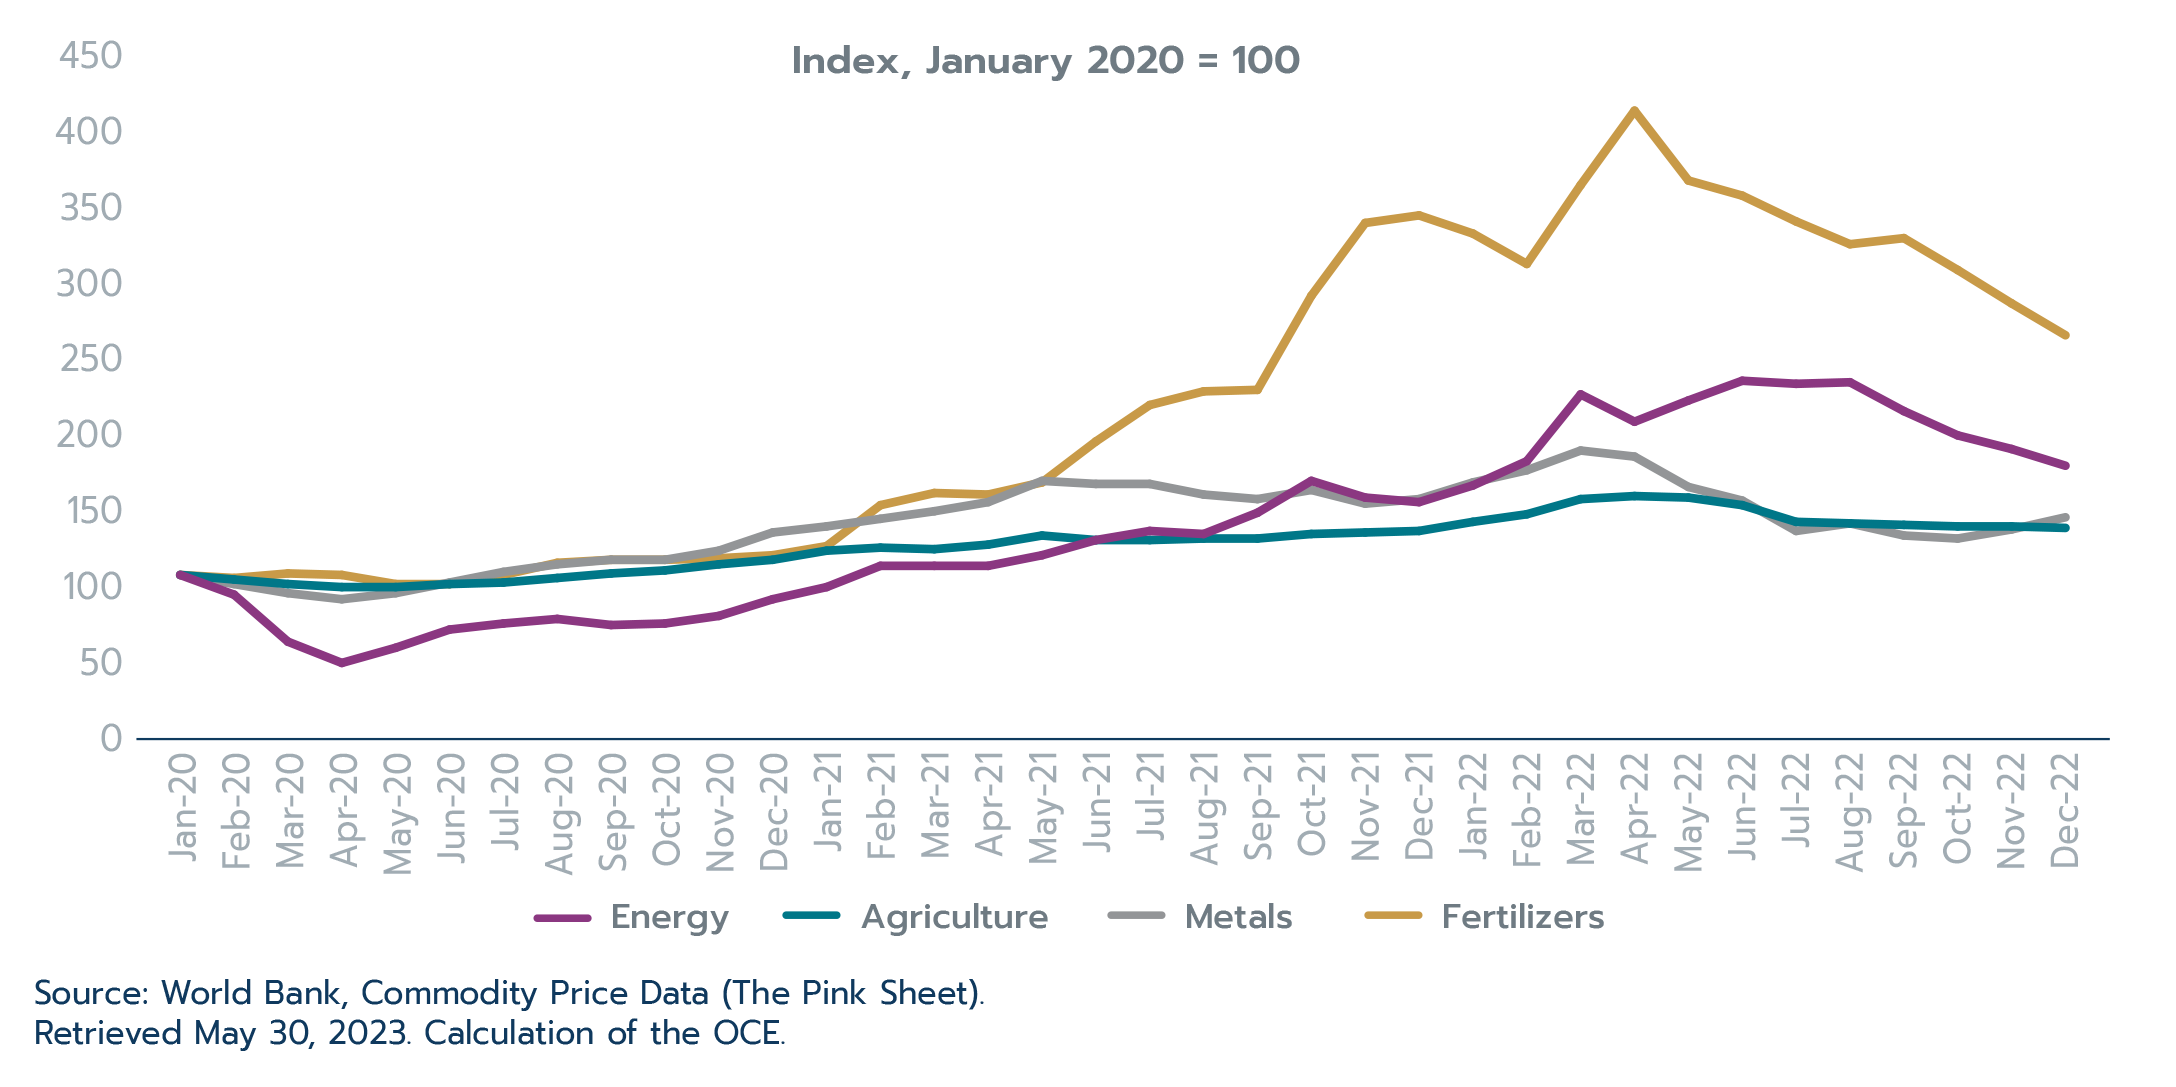 Figure 1.10: Monthly commodity price indices, January 2020 to December 2022